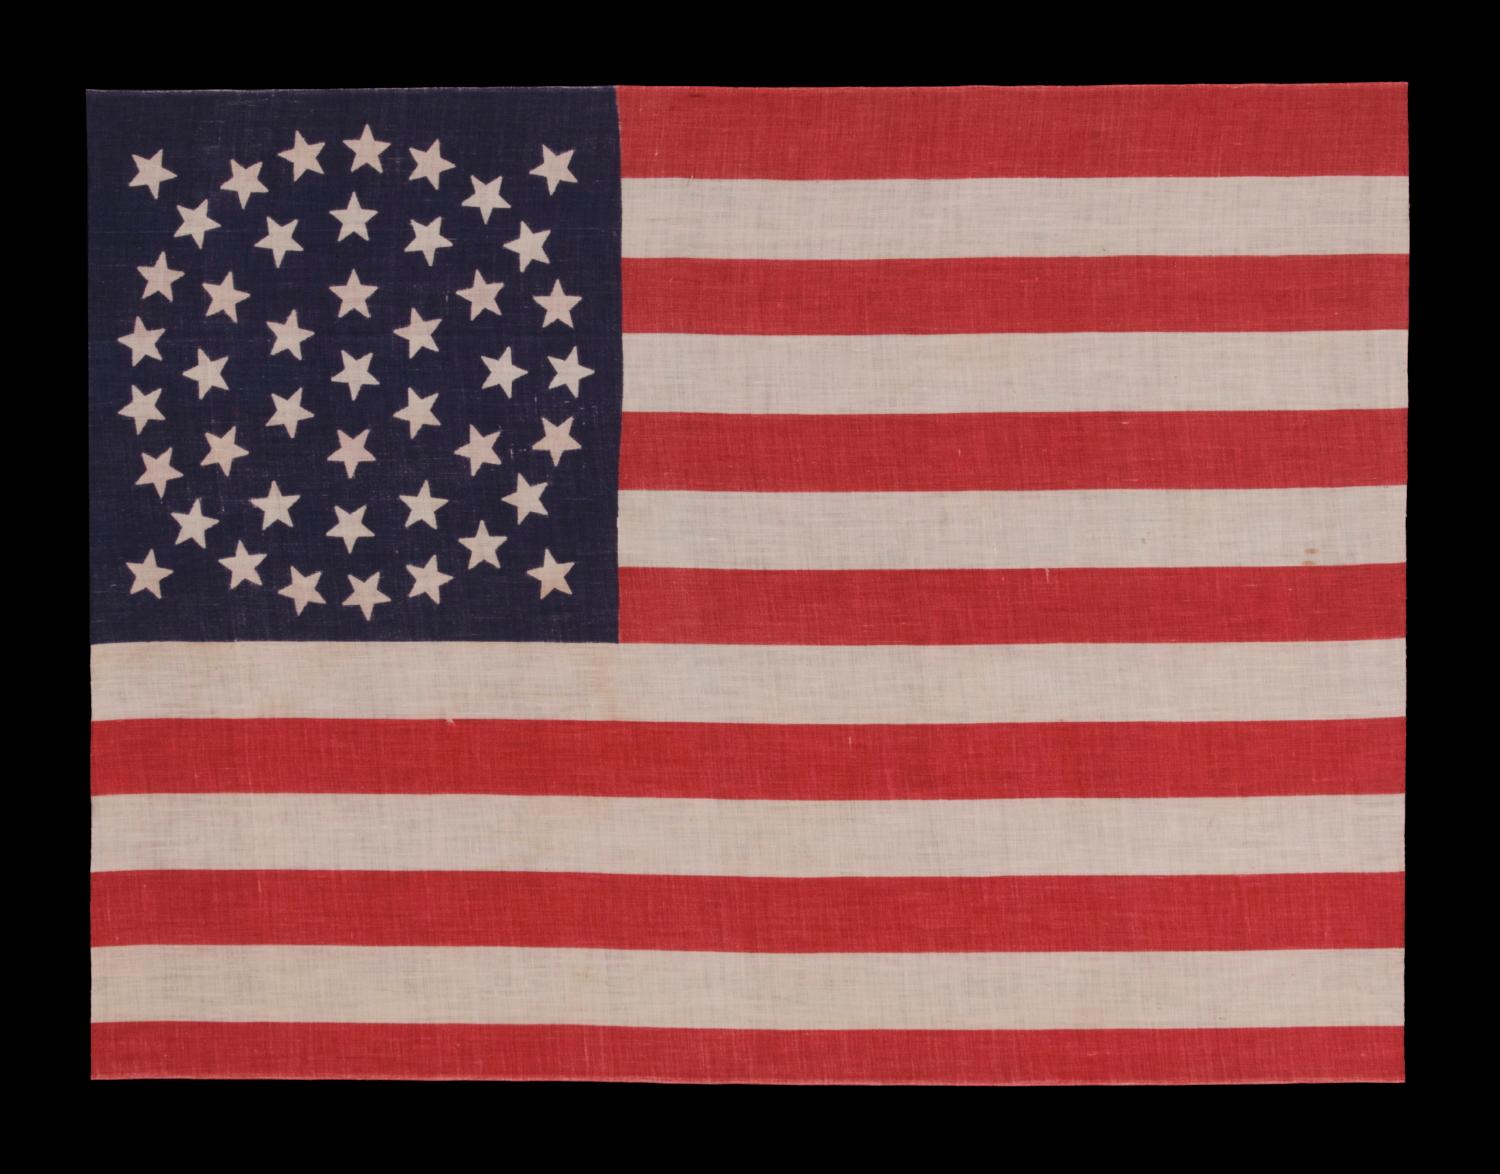 44 STARS ON A LARGE SCALE PARADE FLAG, WYOMING STATEHOOD, 1890-1896, RARE IN THIS PERIOD WITH A WREATH CONFIGURATION 

44 star American parade flag with triple wreath medallion star configuration, printed on cotton. This highly desired star pattern